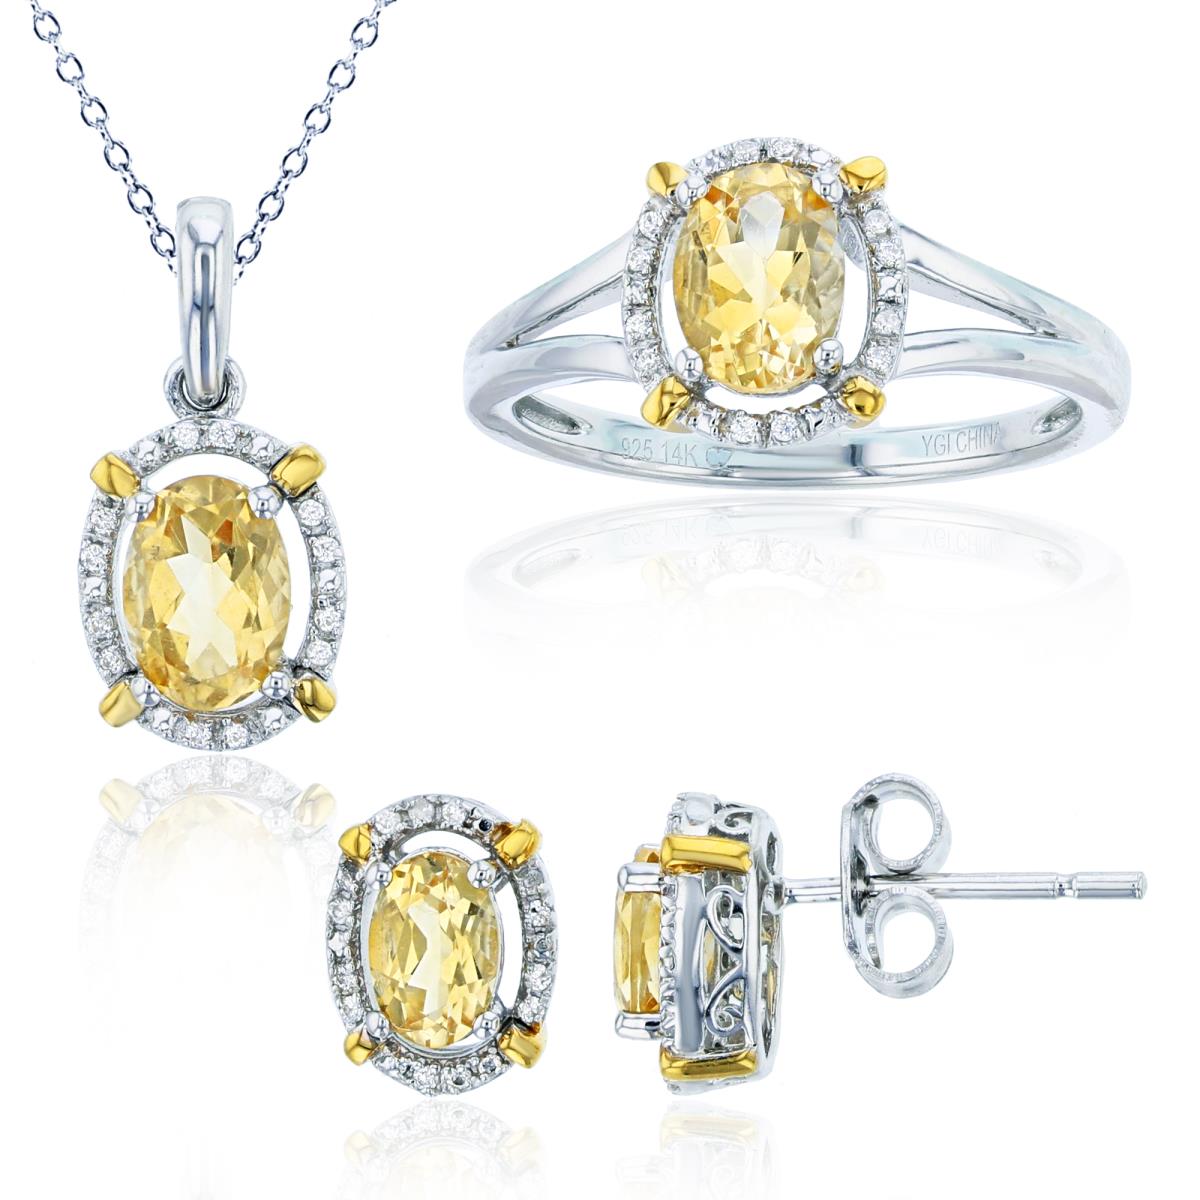 14K Yellow Gold & Sterling Silver Rhodium Rnd CZ & Ov Citrine Ring/ Earrings/ 18"Necklace Set